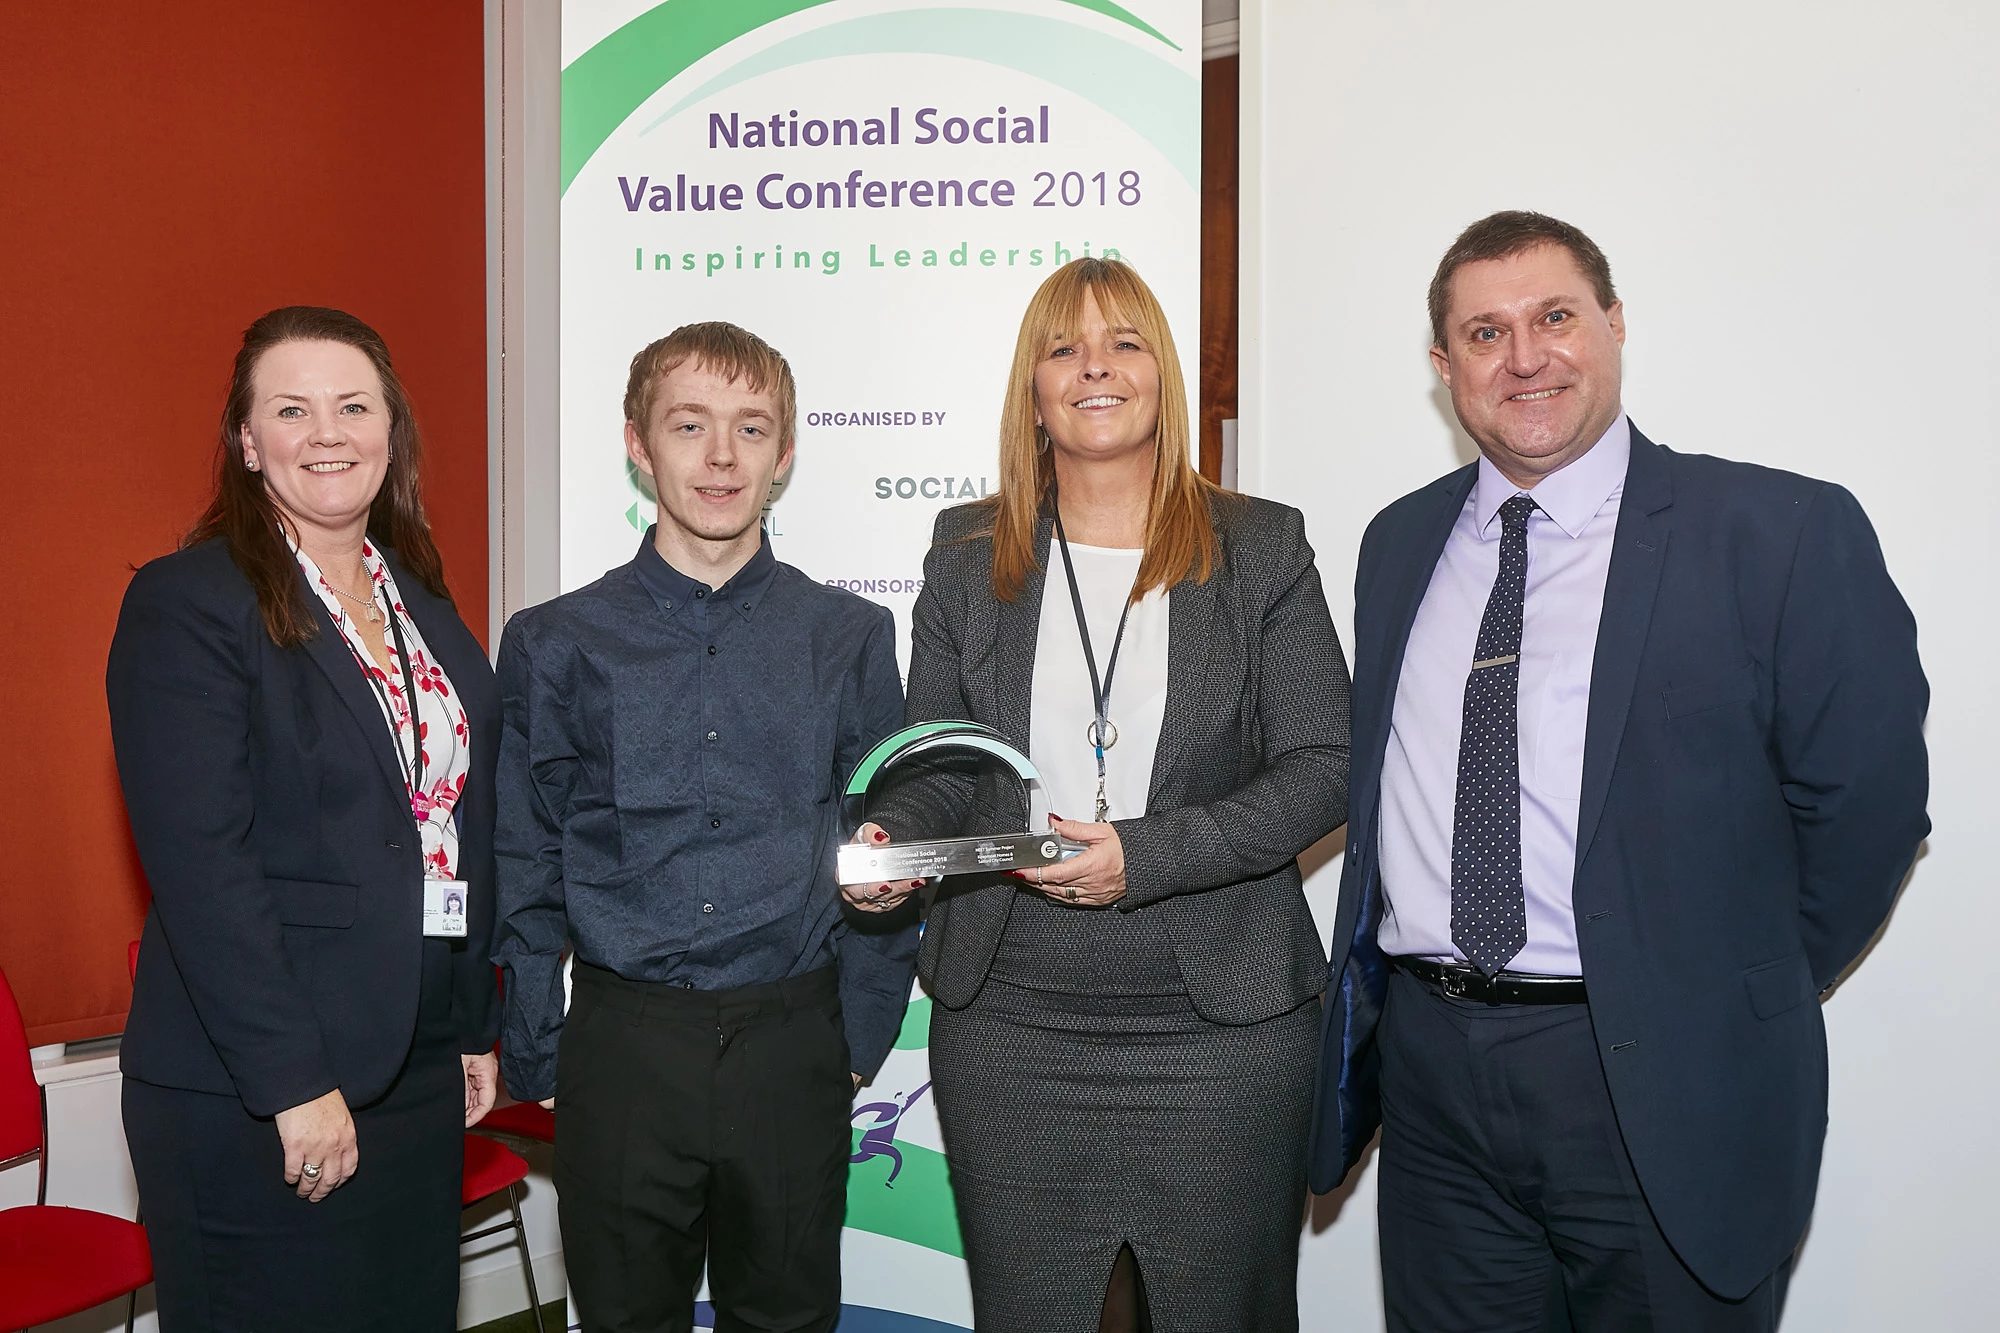 (L-R) Anne Arcus Salford City Council; Kaiden Booth, Buile Hill pupil that attended the courses; Julie Baker, Keepmoat Homes; Darren Knowd, Chairman of the Social Value Taskforce